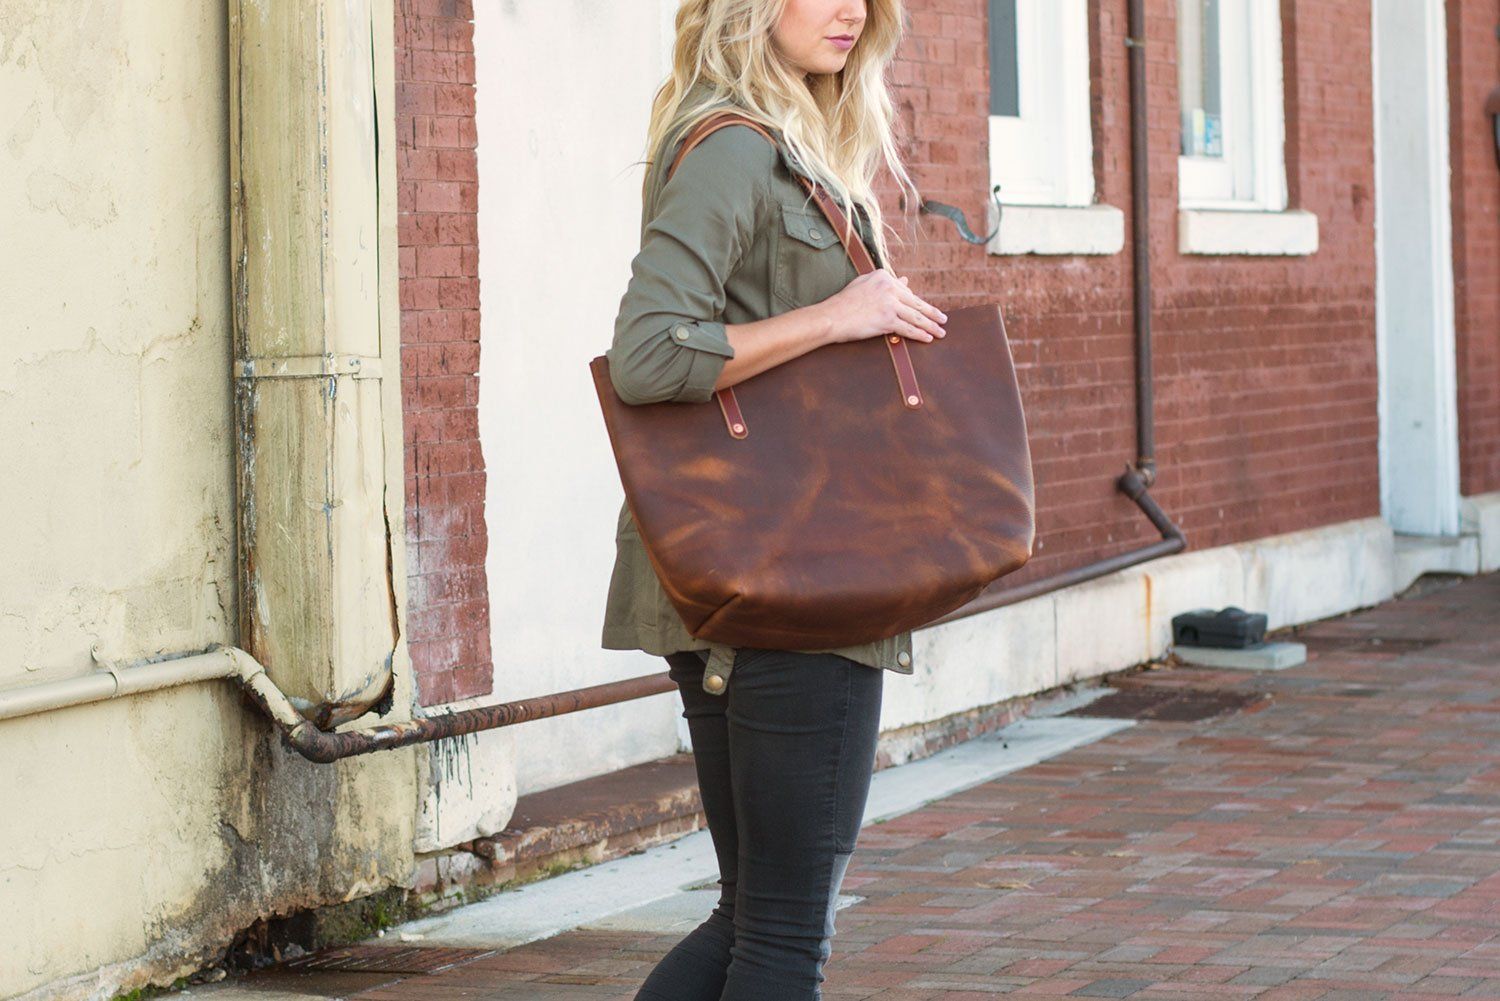 AVERY LEATHER TOTE BAG - LARGE (RTS)